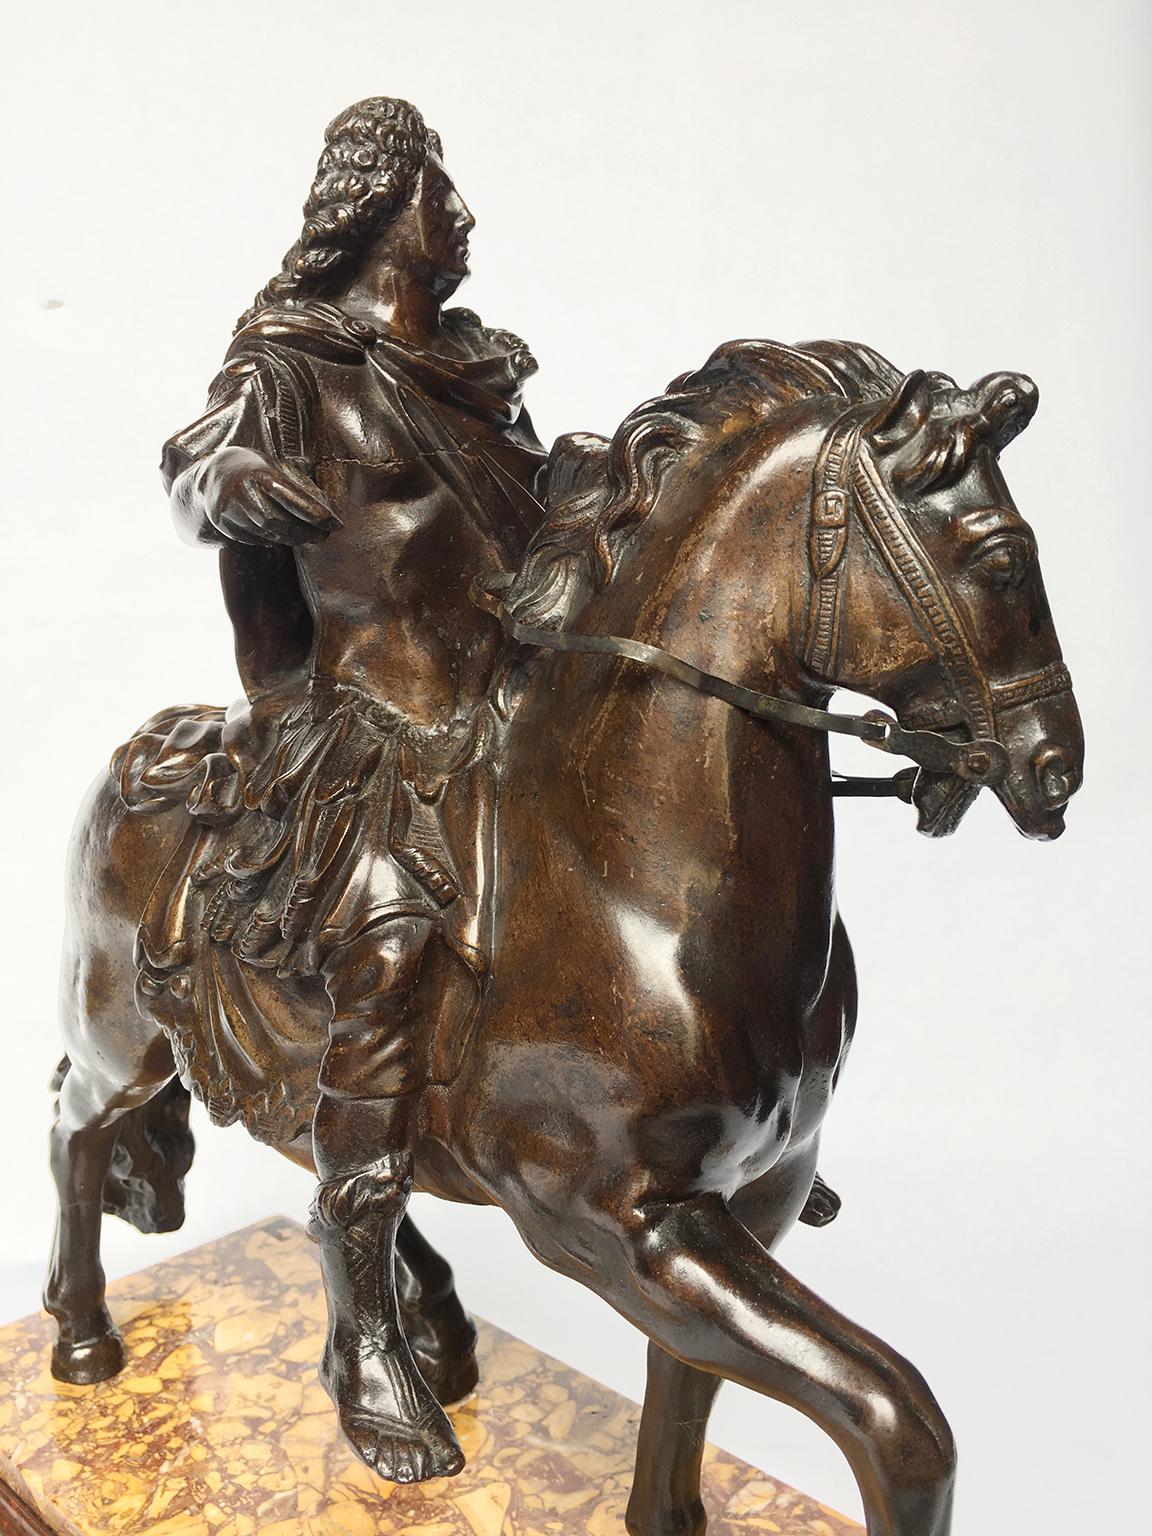 Late 19th Century French Iron Sculpture of Louis XIV on Horseback, circa 1880